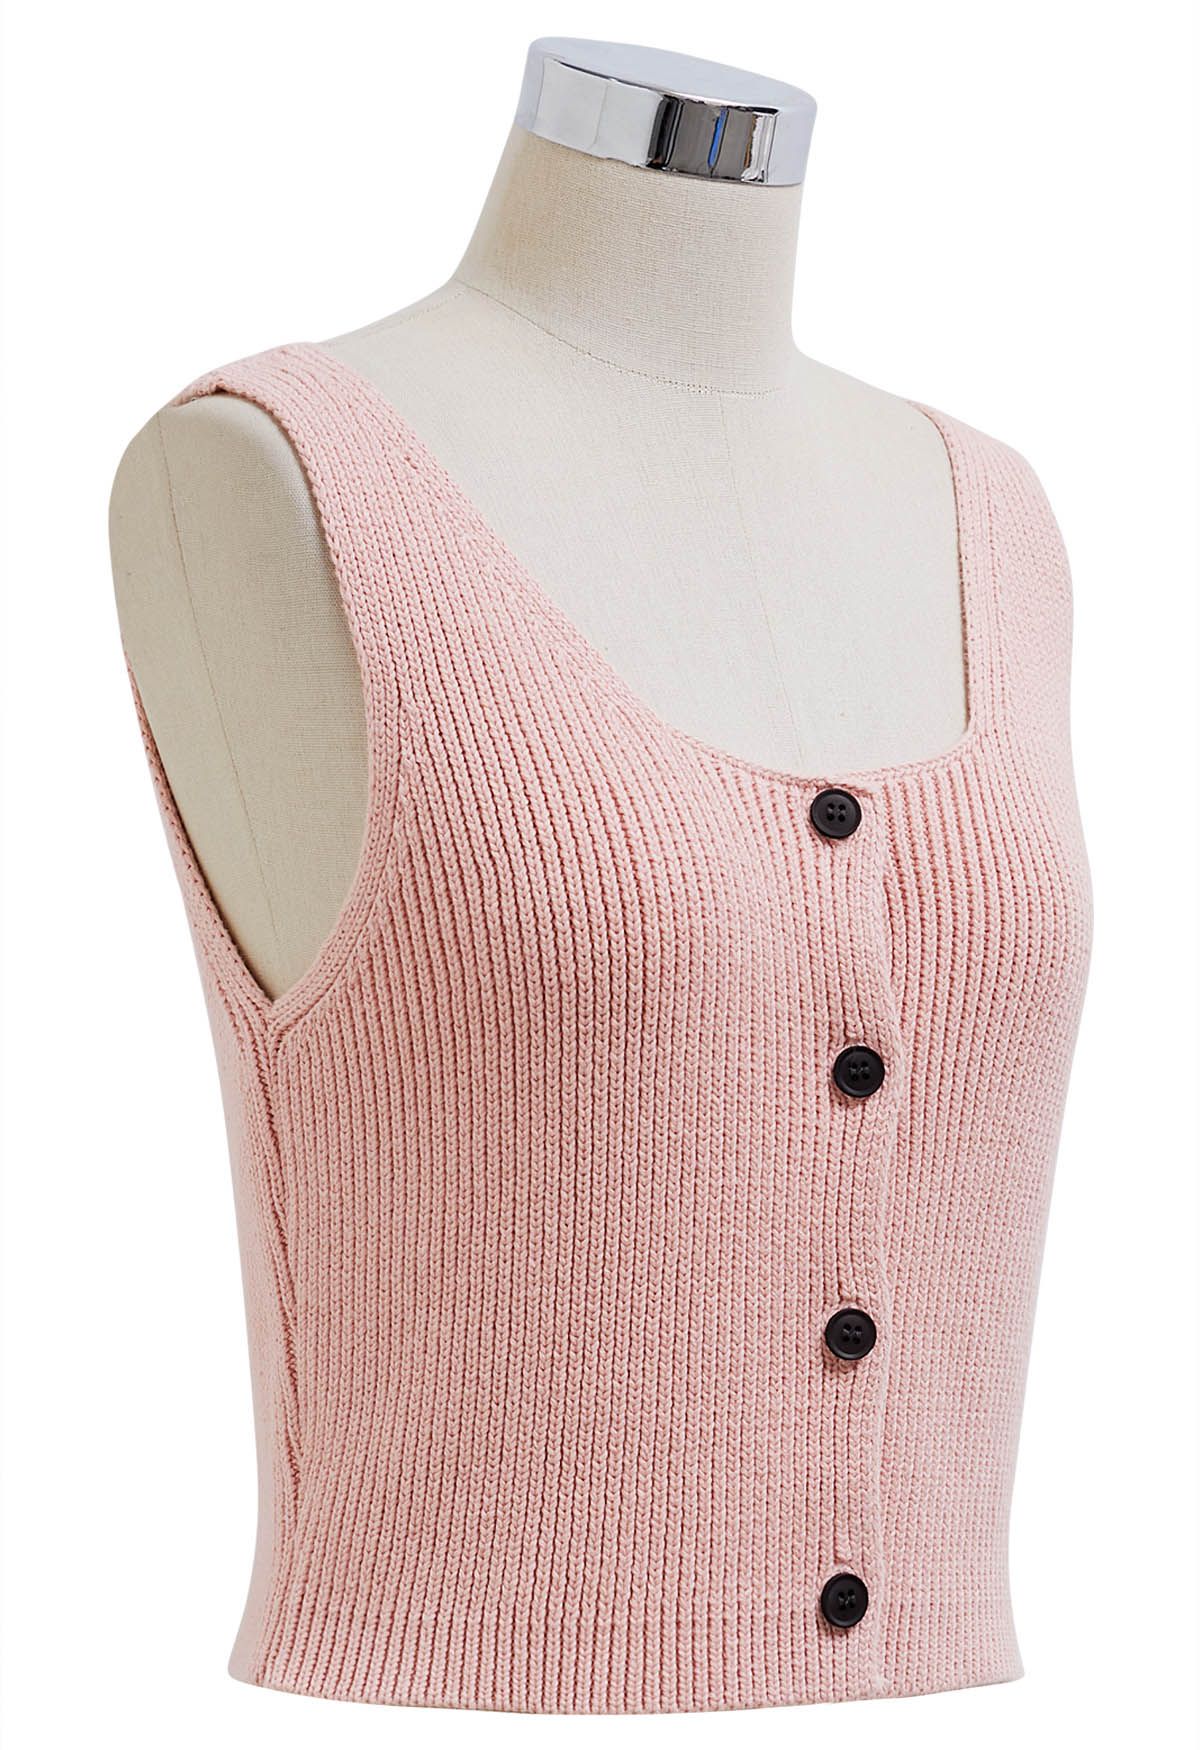 Button Down Sleeveless Knit Crop Top in Pink